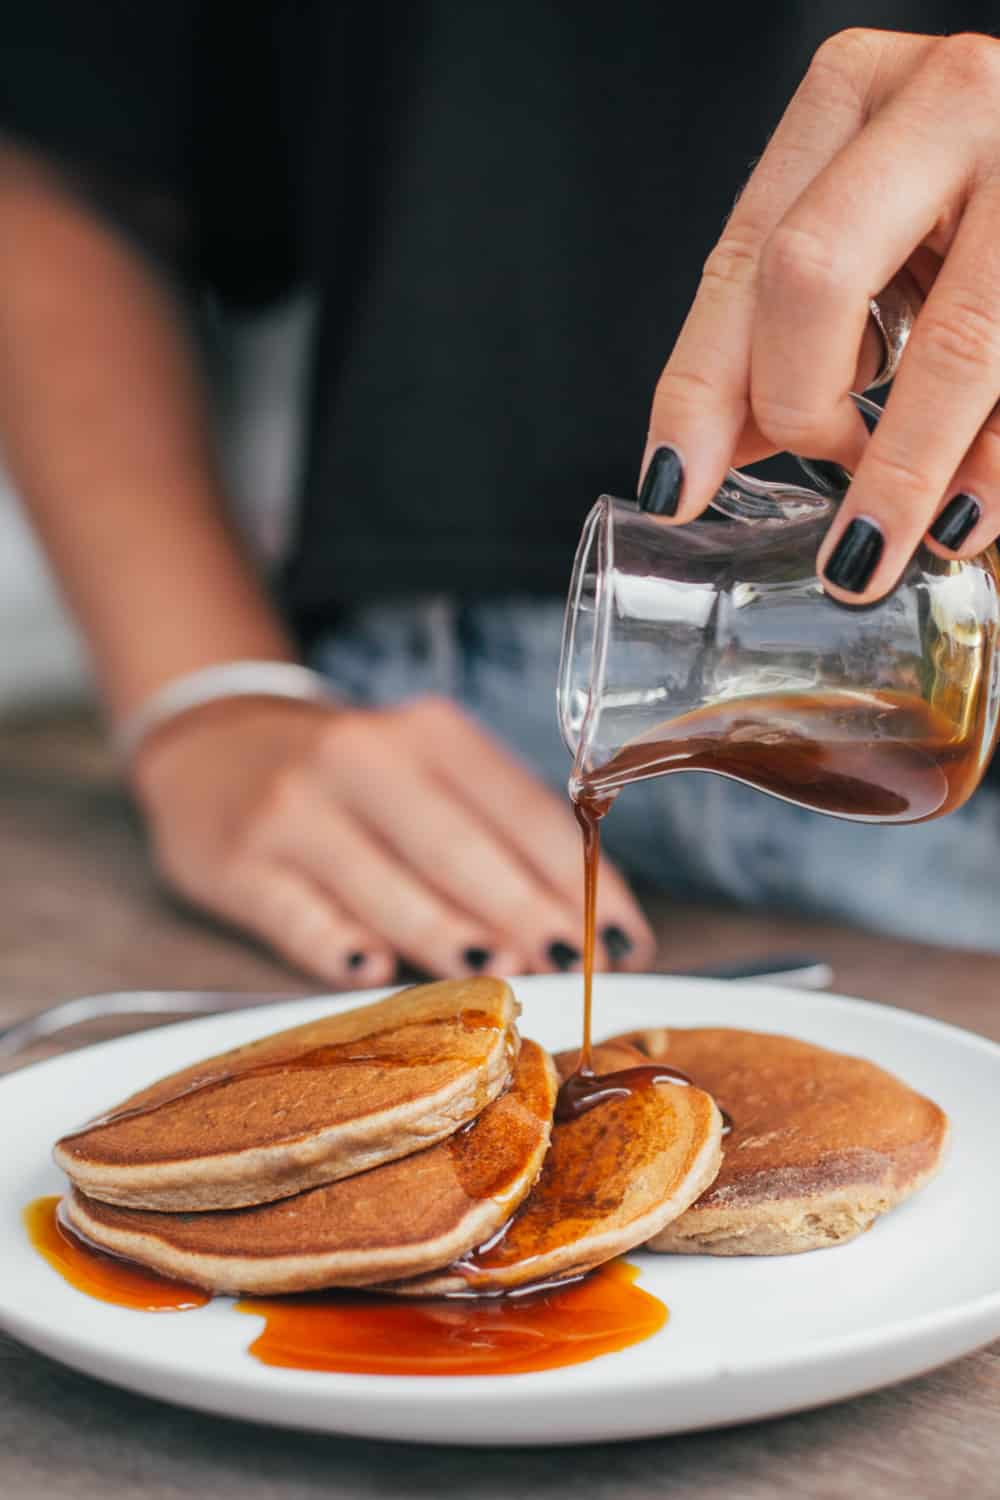 Does Maple Syrup Go Bad? How Long Does It Last?